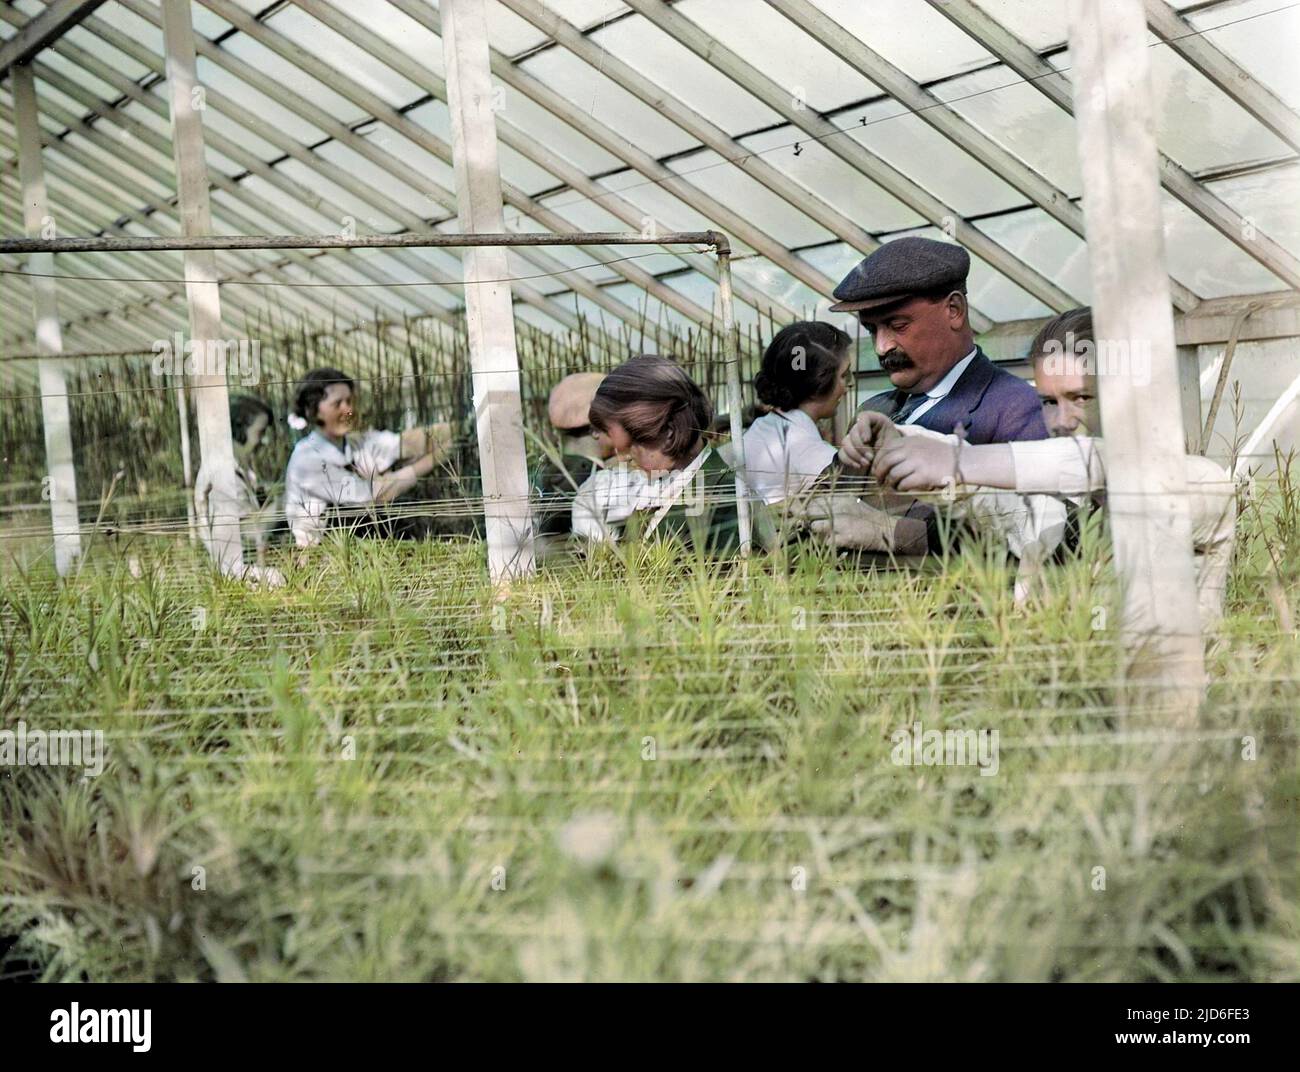 Students learning how to harvest properly in a greenhouse at Swanley Agricultural College, Swanley, Kent, England. Colourised version of : 10164553       Date: early 1930s Stock Photo